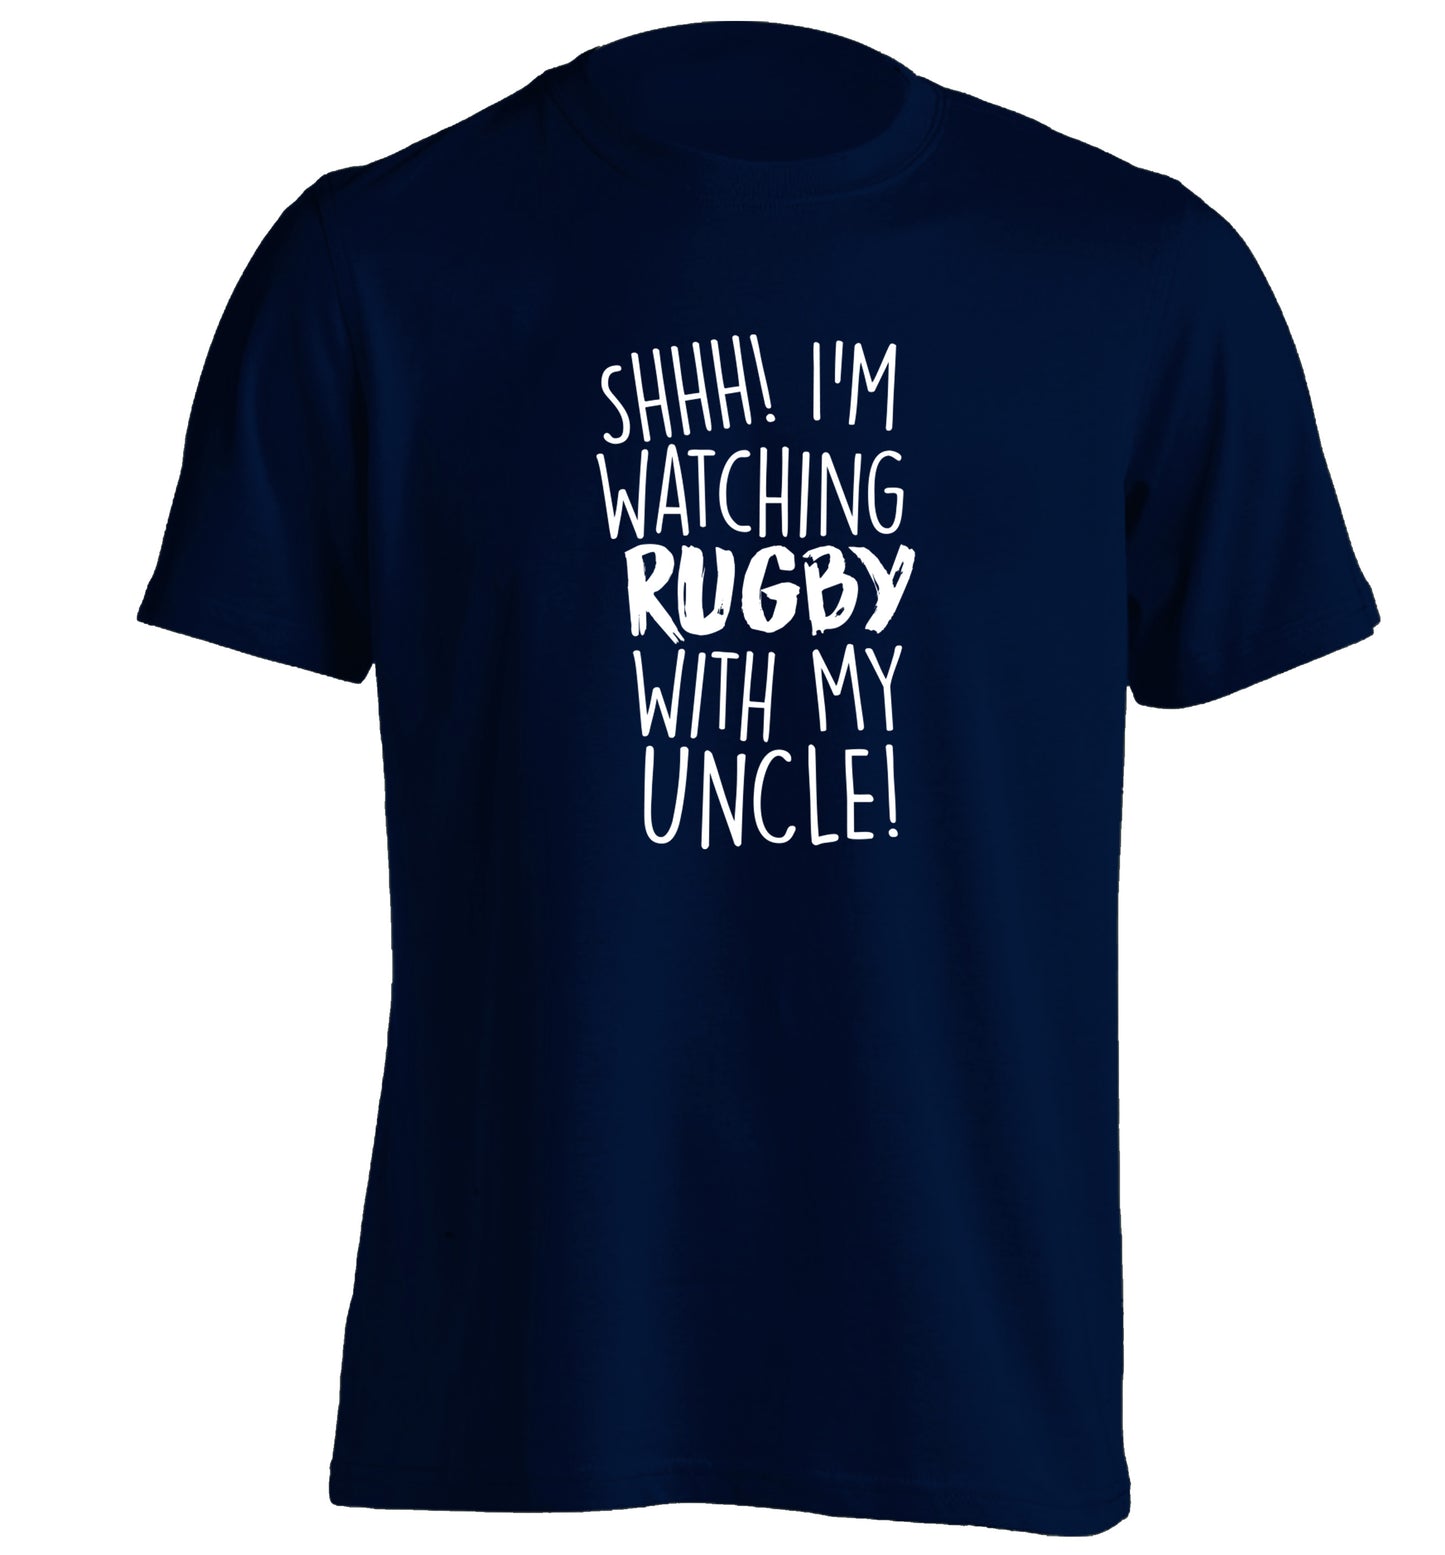 Shh.. I'm watching rugby with my uncle adults unisex navy Tshirt 2XL